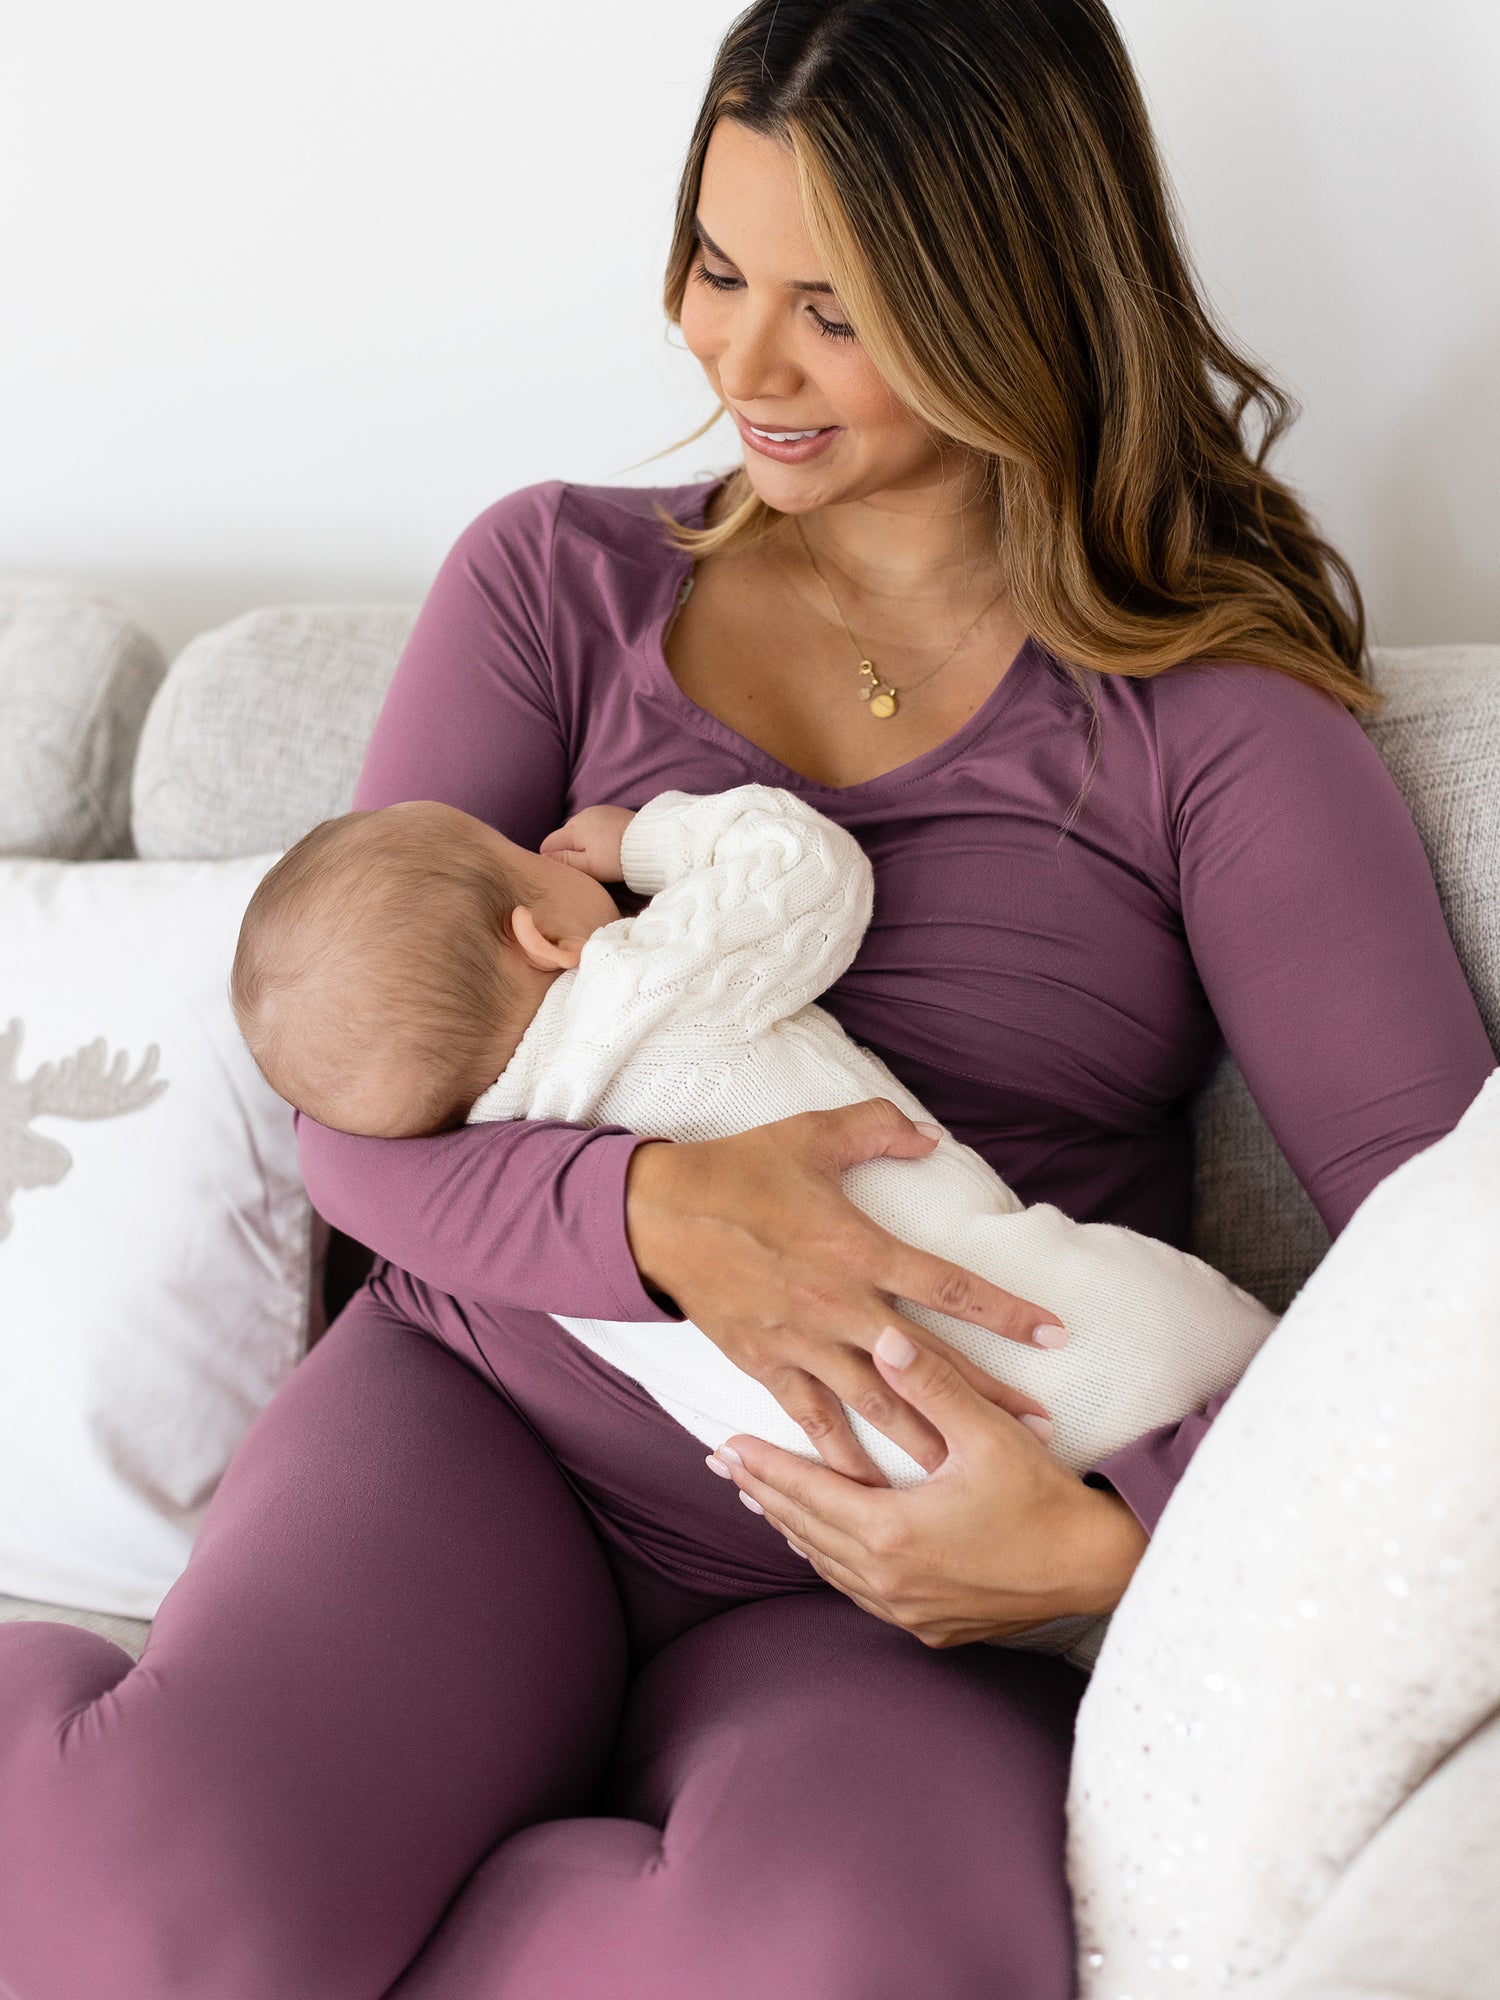 Model breastfeeding her baby while sitting on a couch wearing the jane Nursing Pajama Set in Burgundy Plum @model_info:Nicole is 5'8" and wearing a Large.